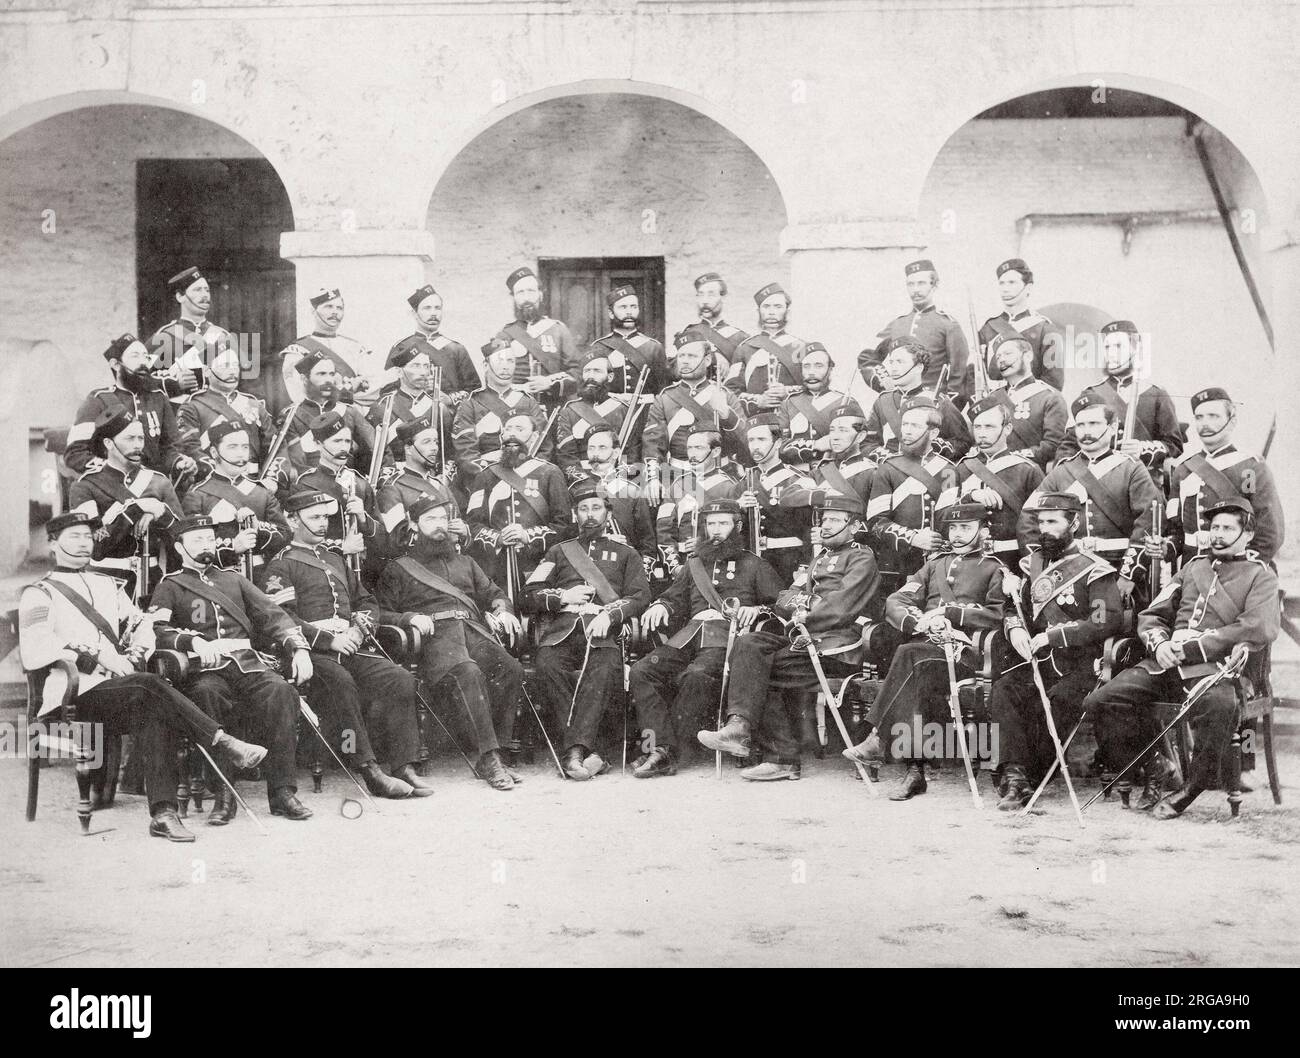 Vintage 19th century photograph - British army in India - NC officers of the 77th Regiment, 1860s Stock Photo